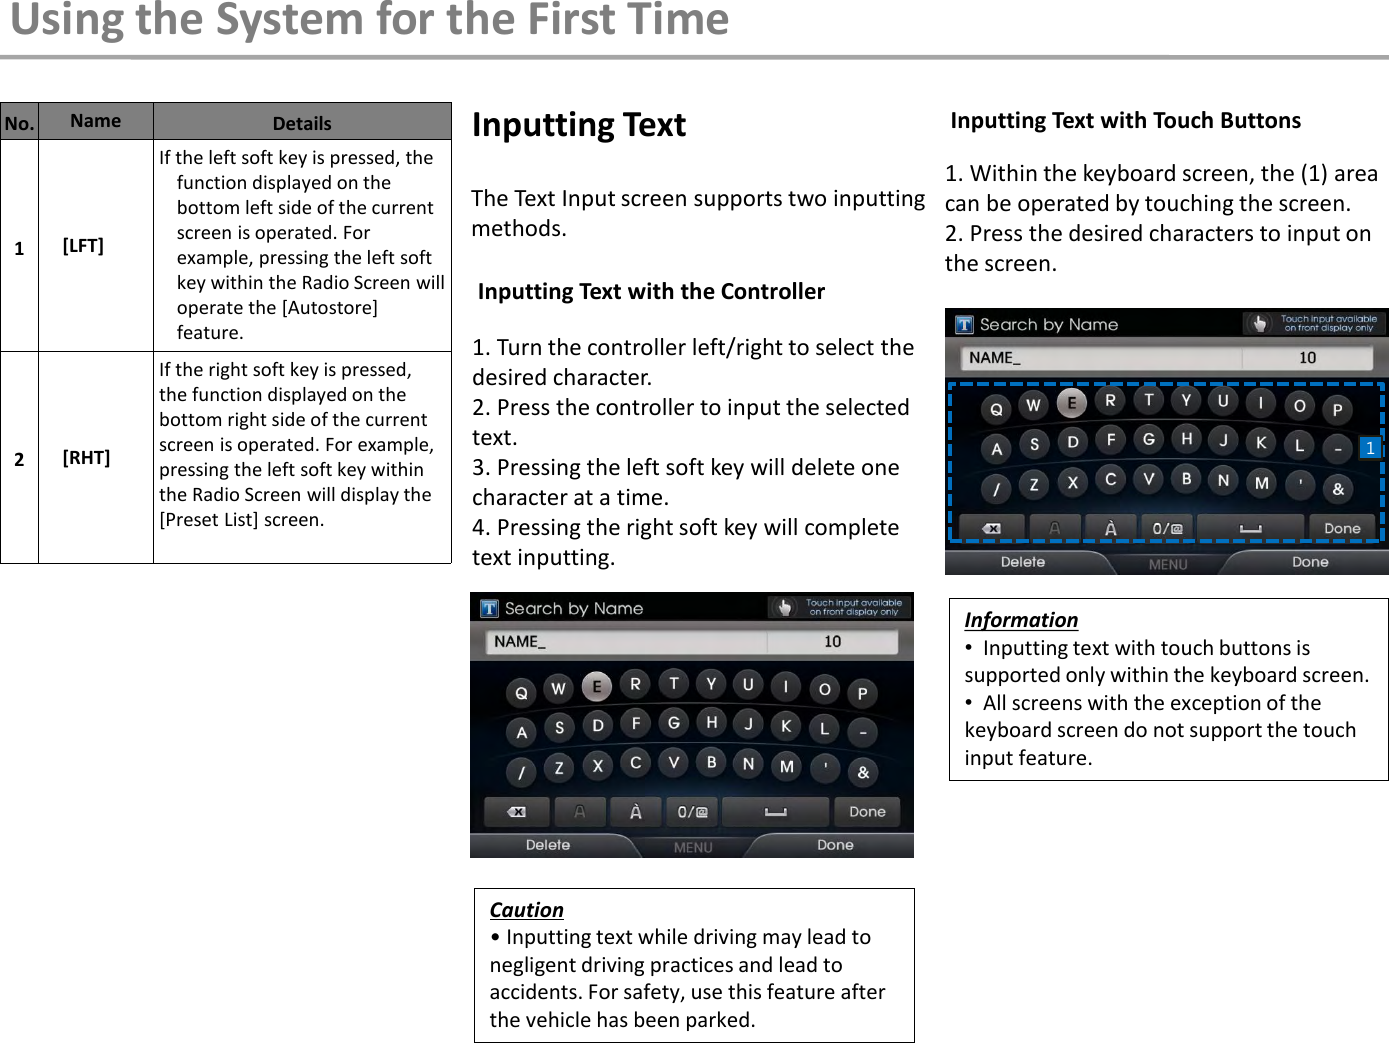 1. Turn the controller left/right to select the desired character. 2. Press the controller to input the selected text.  3. Pressing the left soft key will delete one character at a time.  4. Pressing the right soft key will complete text inputting. The Text Input screen supports two inputting methods. 1. Within the keyboard screen, the (1) area can be operated by touching the screen. 2. Press the desired characters to input on the screen.  Inputting Text with the Controller Inputting Text with Touch Buttons Inputting Text No. Name  Details 1  [LFT] If the left soft key is pressed, the function displayed on the bottom left side of the current screen is operated. For example, pressing the left soft key within the Radio Screen will operate the [Autostore] feature. 2  [RHT] If the right soft key is pressed, the function displayed on the bottom right side of the current screen is operated. For example, pressing the left soft key within the Radio Screen will display the [Preset List] screen.   Caution • Inputting text while driving may lead to negligent driving practices and lead to accidents. For safety, use this feature after the vehicle has been parked. Information •  Inputting text with touch buttons is supported only within the keyboard screen. •  All screens with the exception of the keyboard screen do not support the touch input feature. Using the System for the First Time 1 